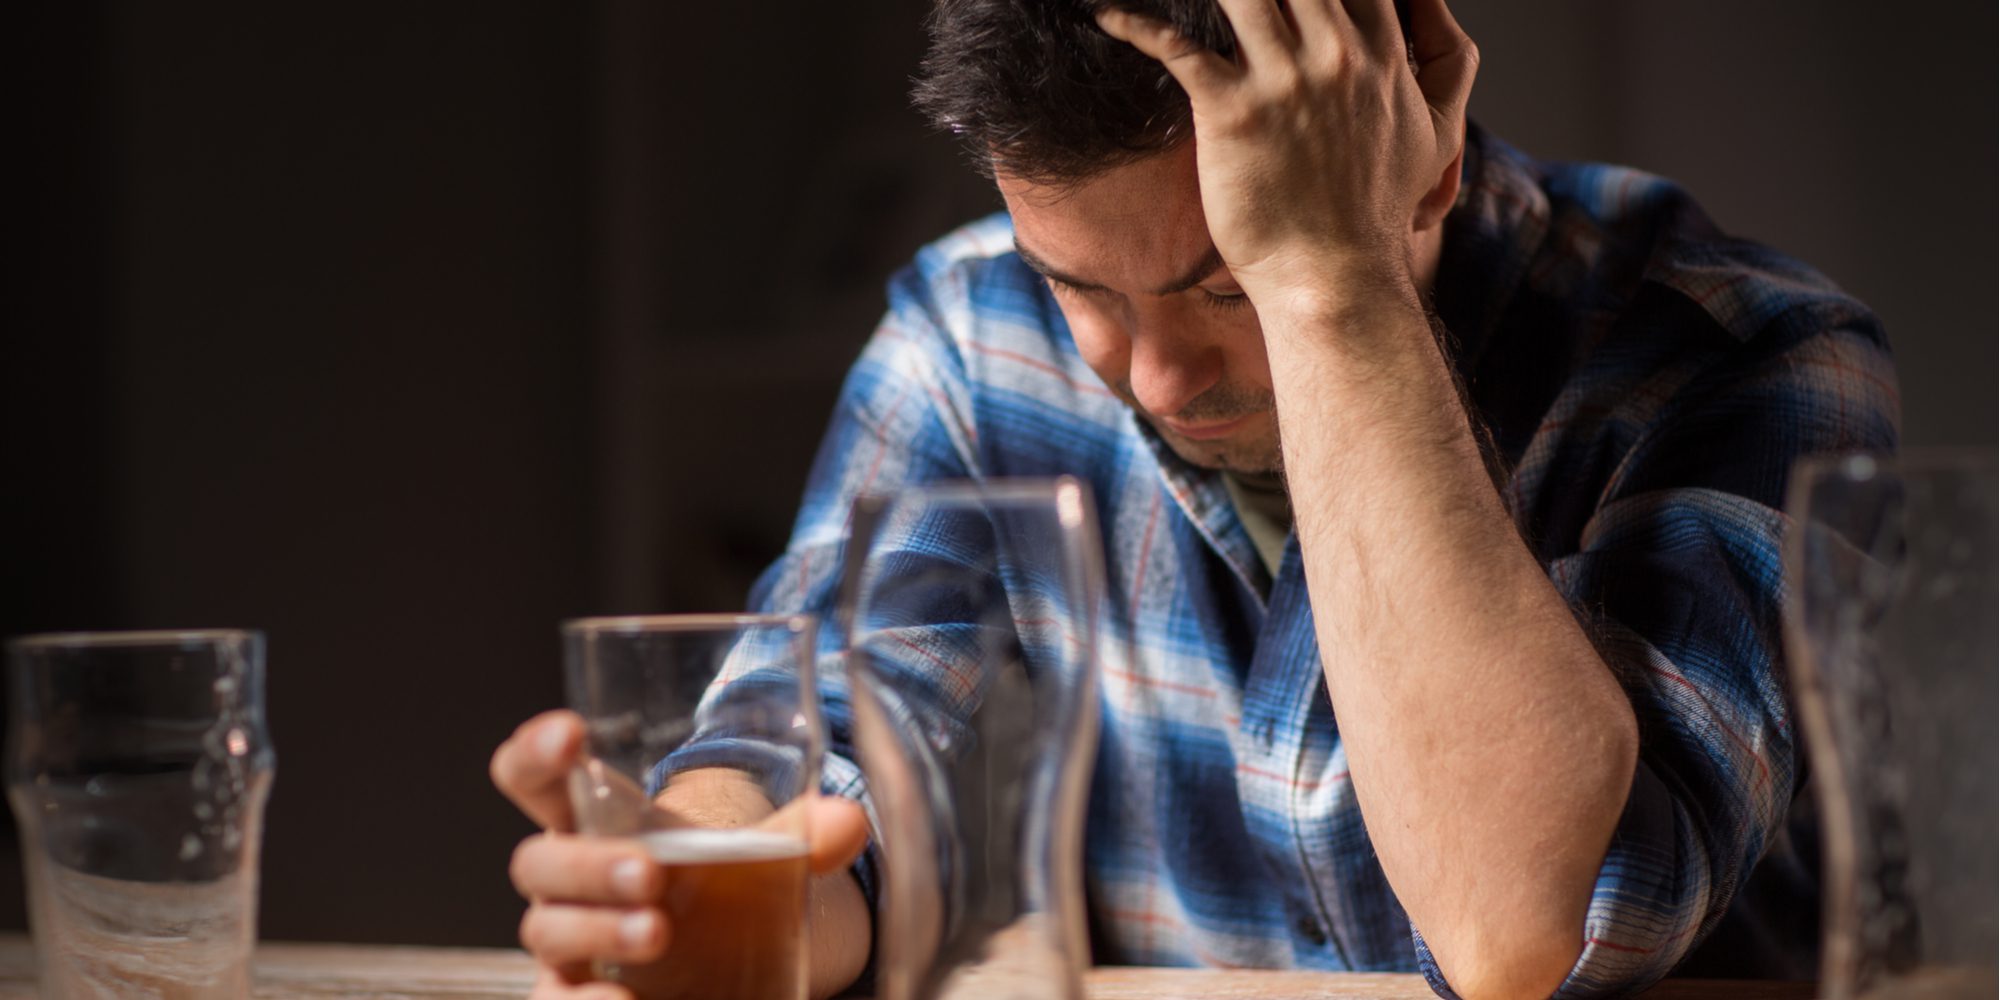 Are You a Functioning Addict? Signs of Addiction